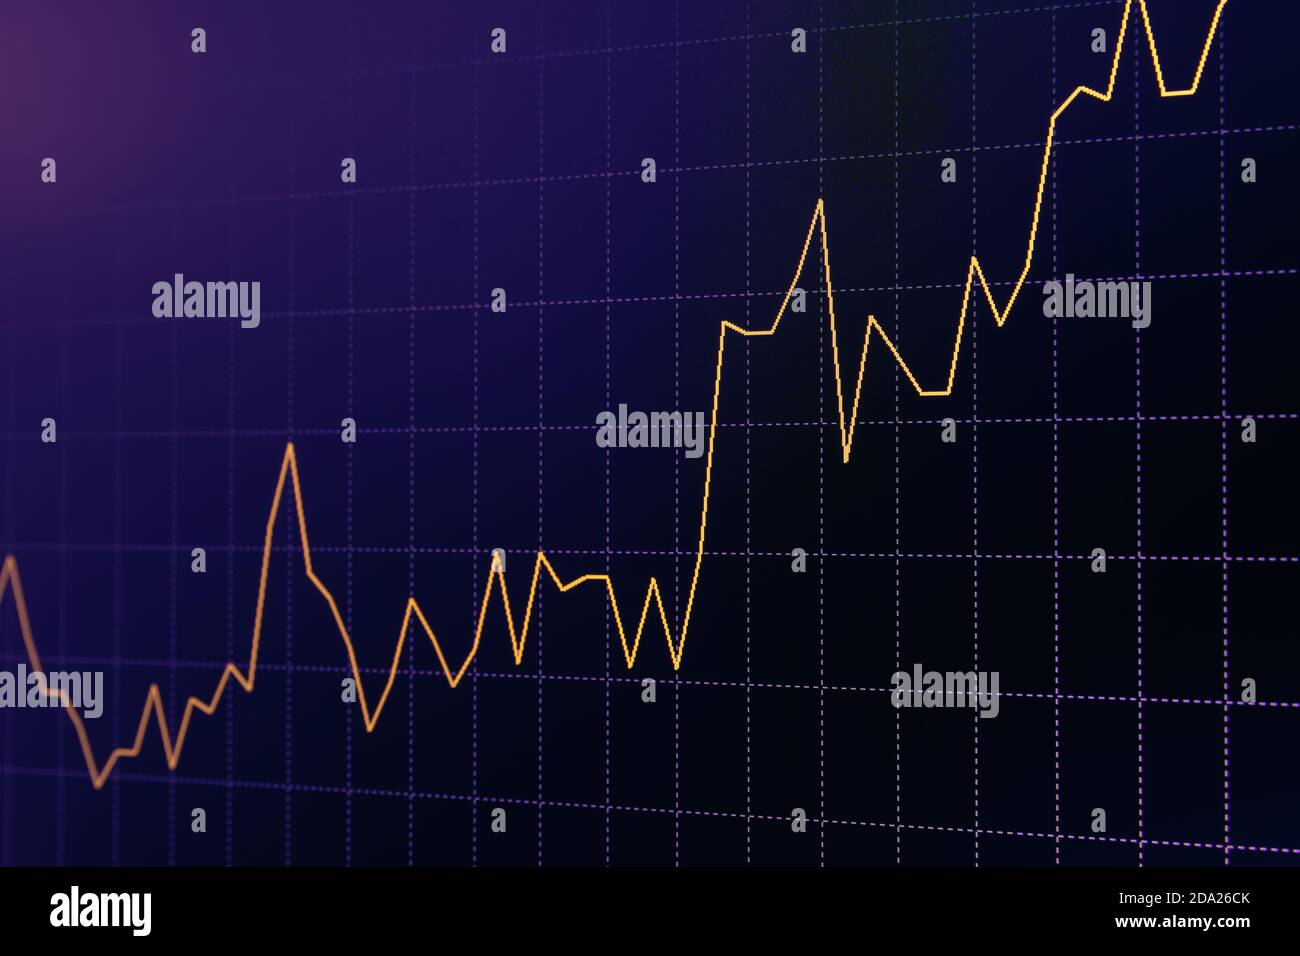 Continuous Bullish Trend Yellow Stock Chart or Forex Chart and Table Line on Black Background in Purple Tone Stock Photo